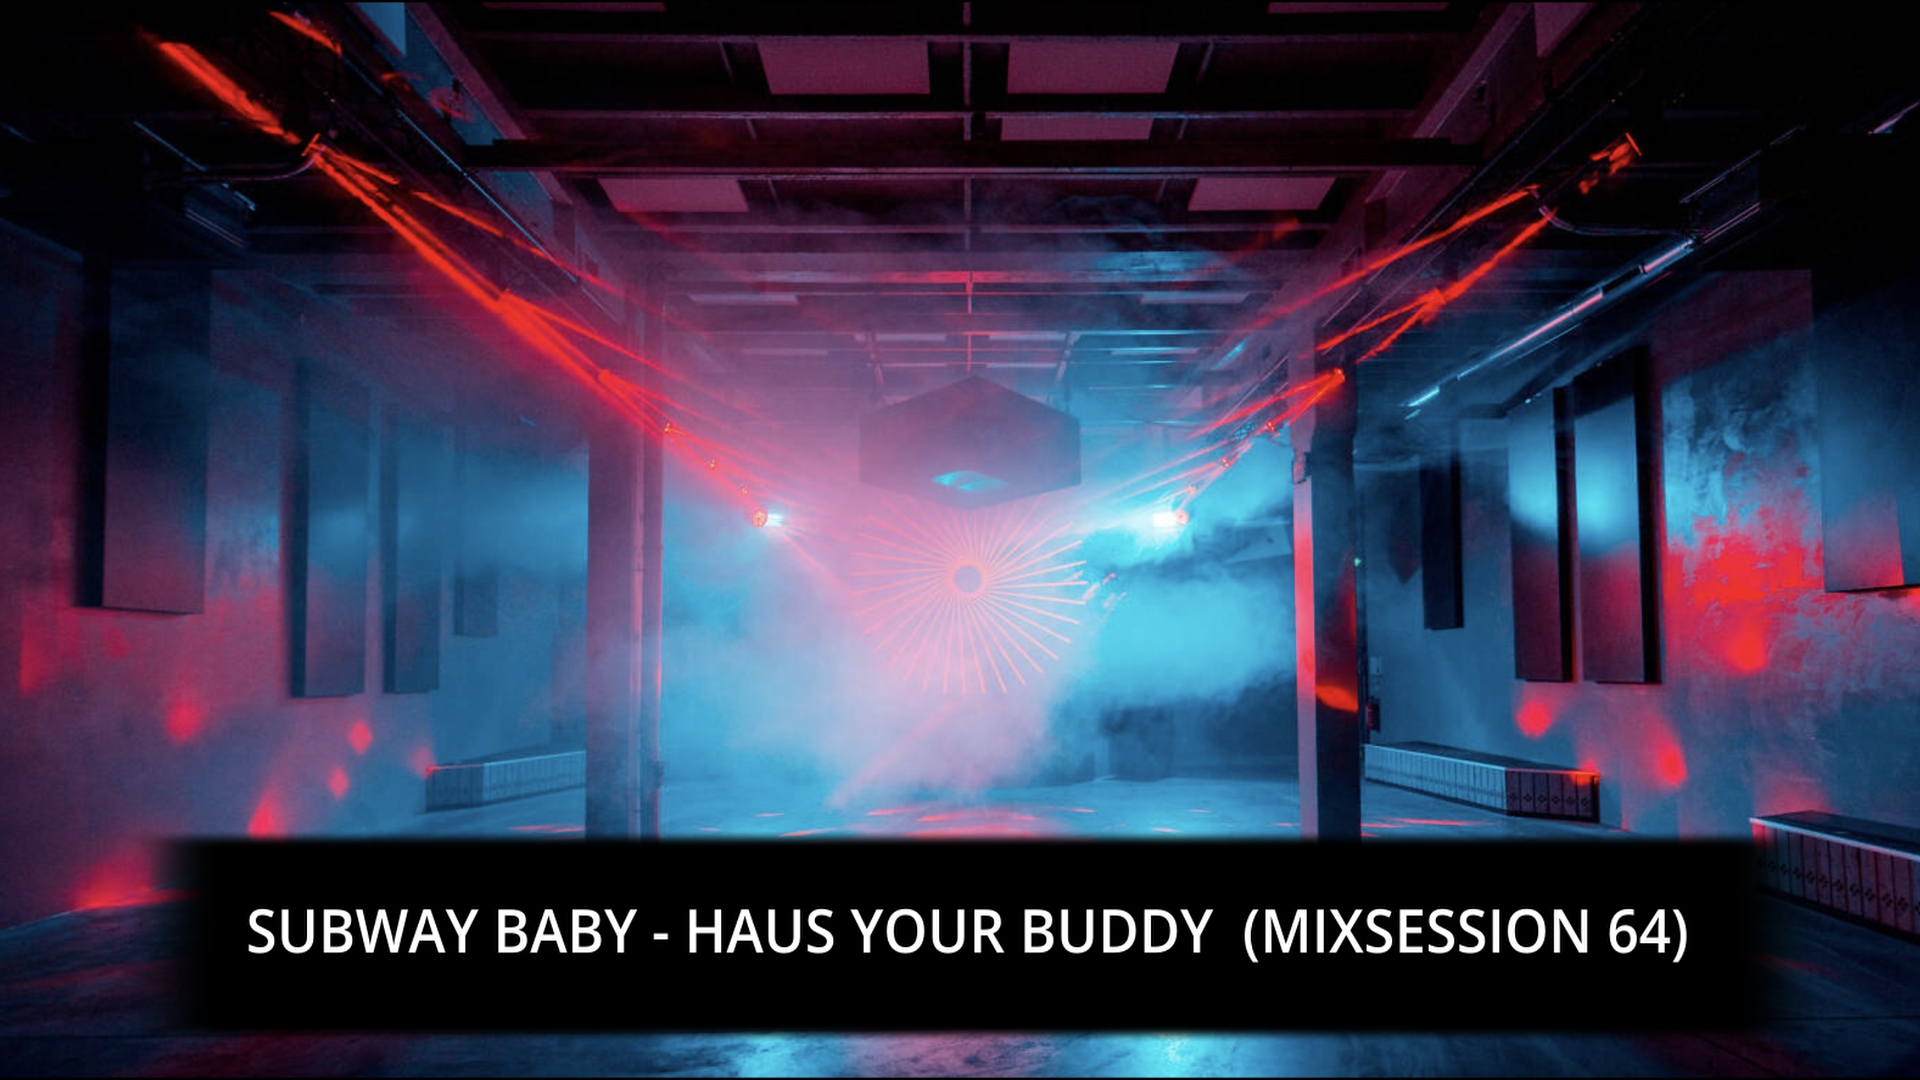 Subway Baby-Haus Your Buddy (Mixsession 64)